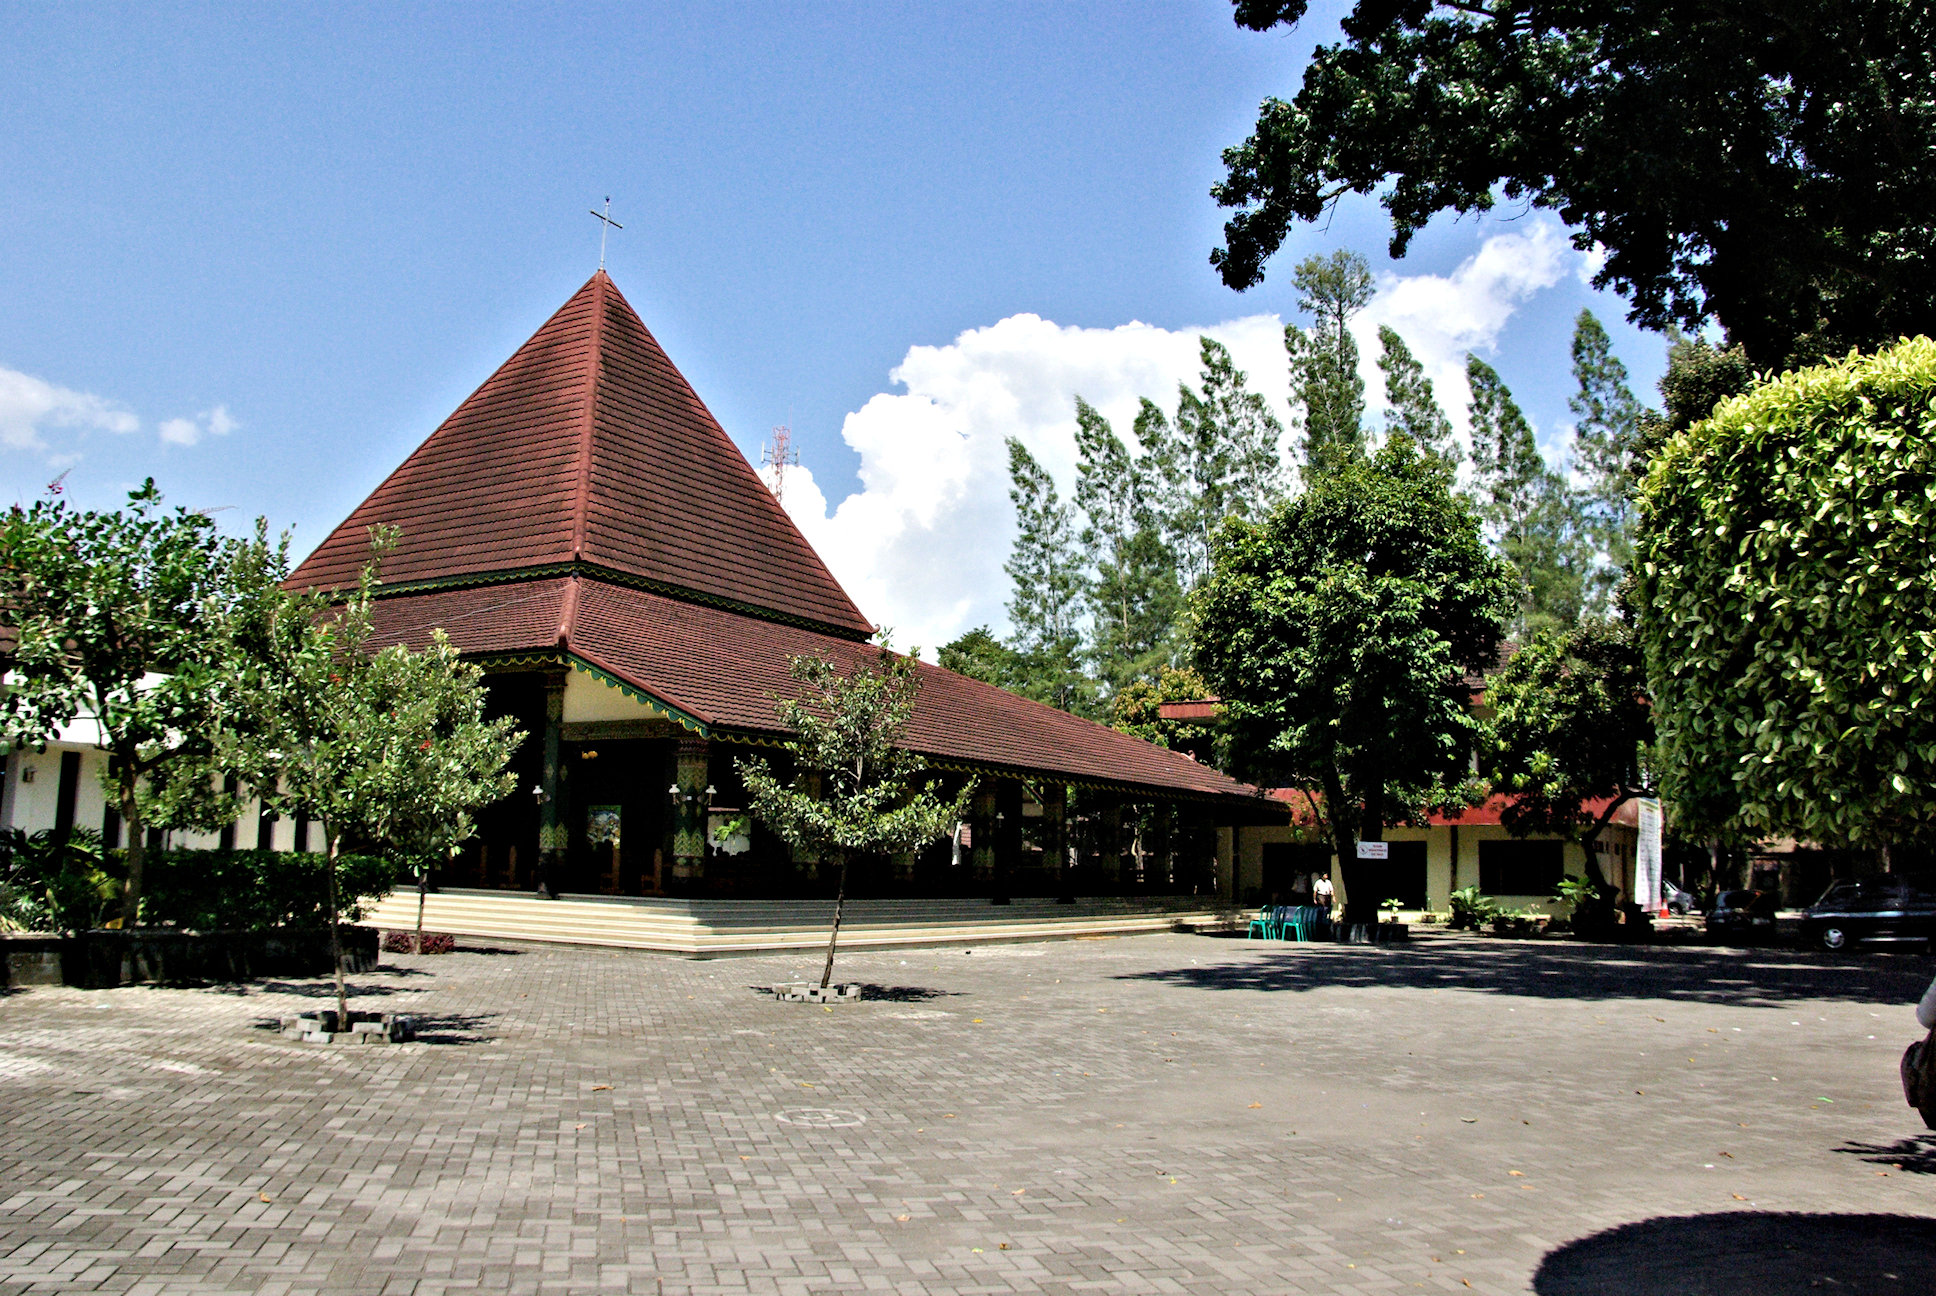 The Javanese architectural style Hall of The Church & Temple of the Sacred Heart of Jesus, Ganjuran, Bantul, Yogyakarta.(12/02/2012). 